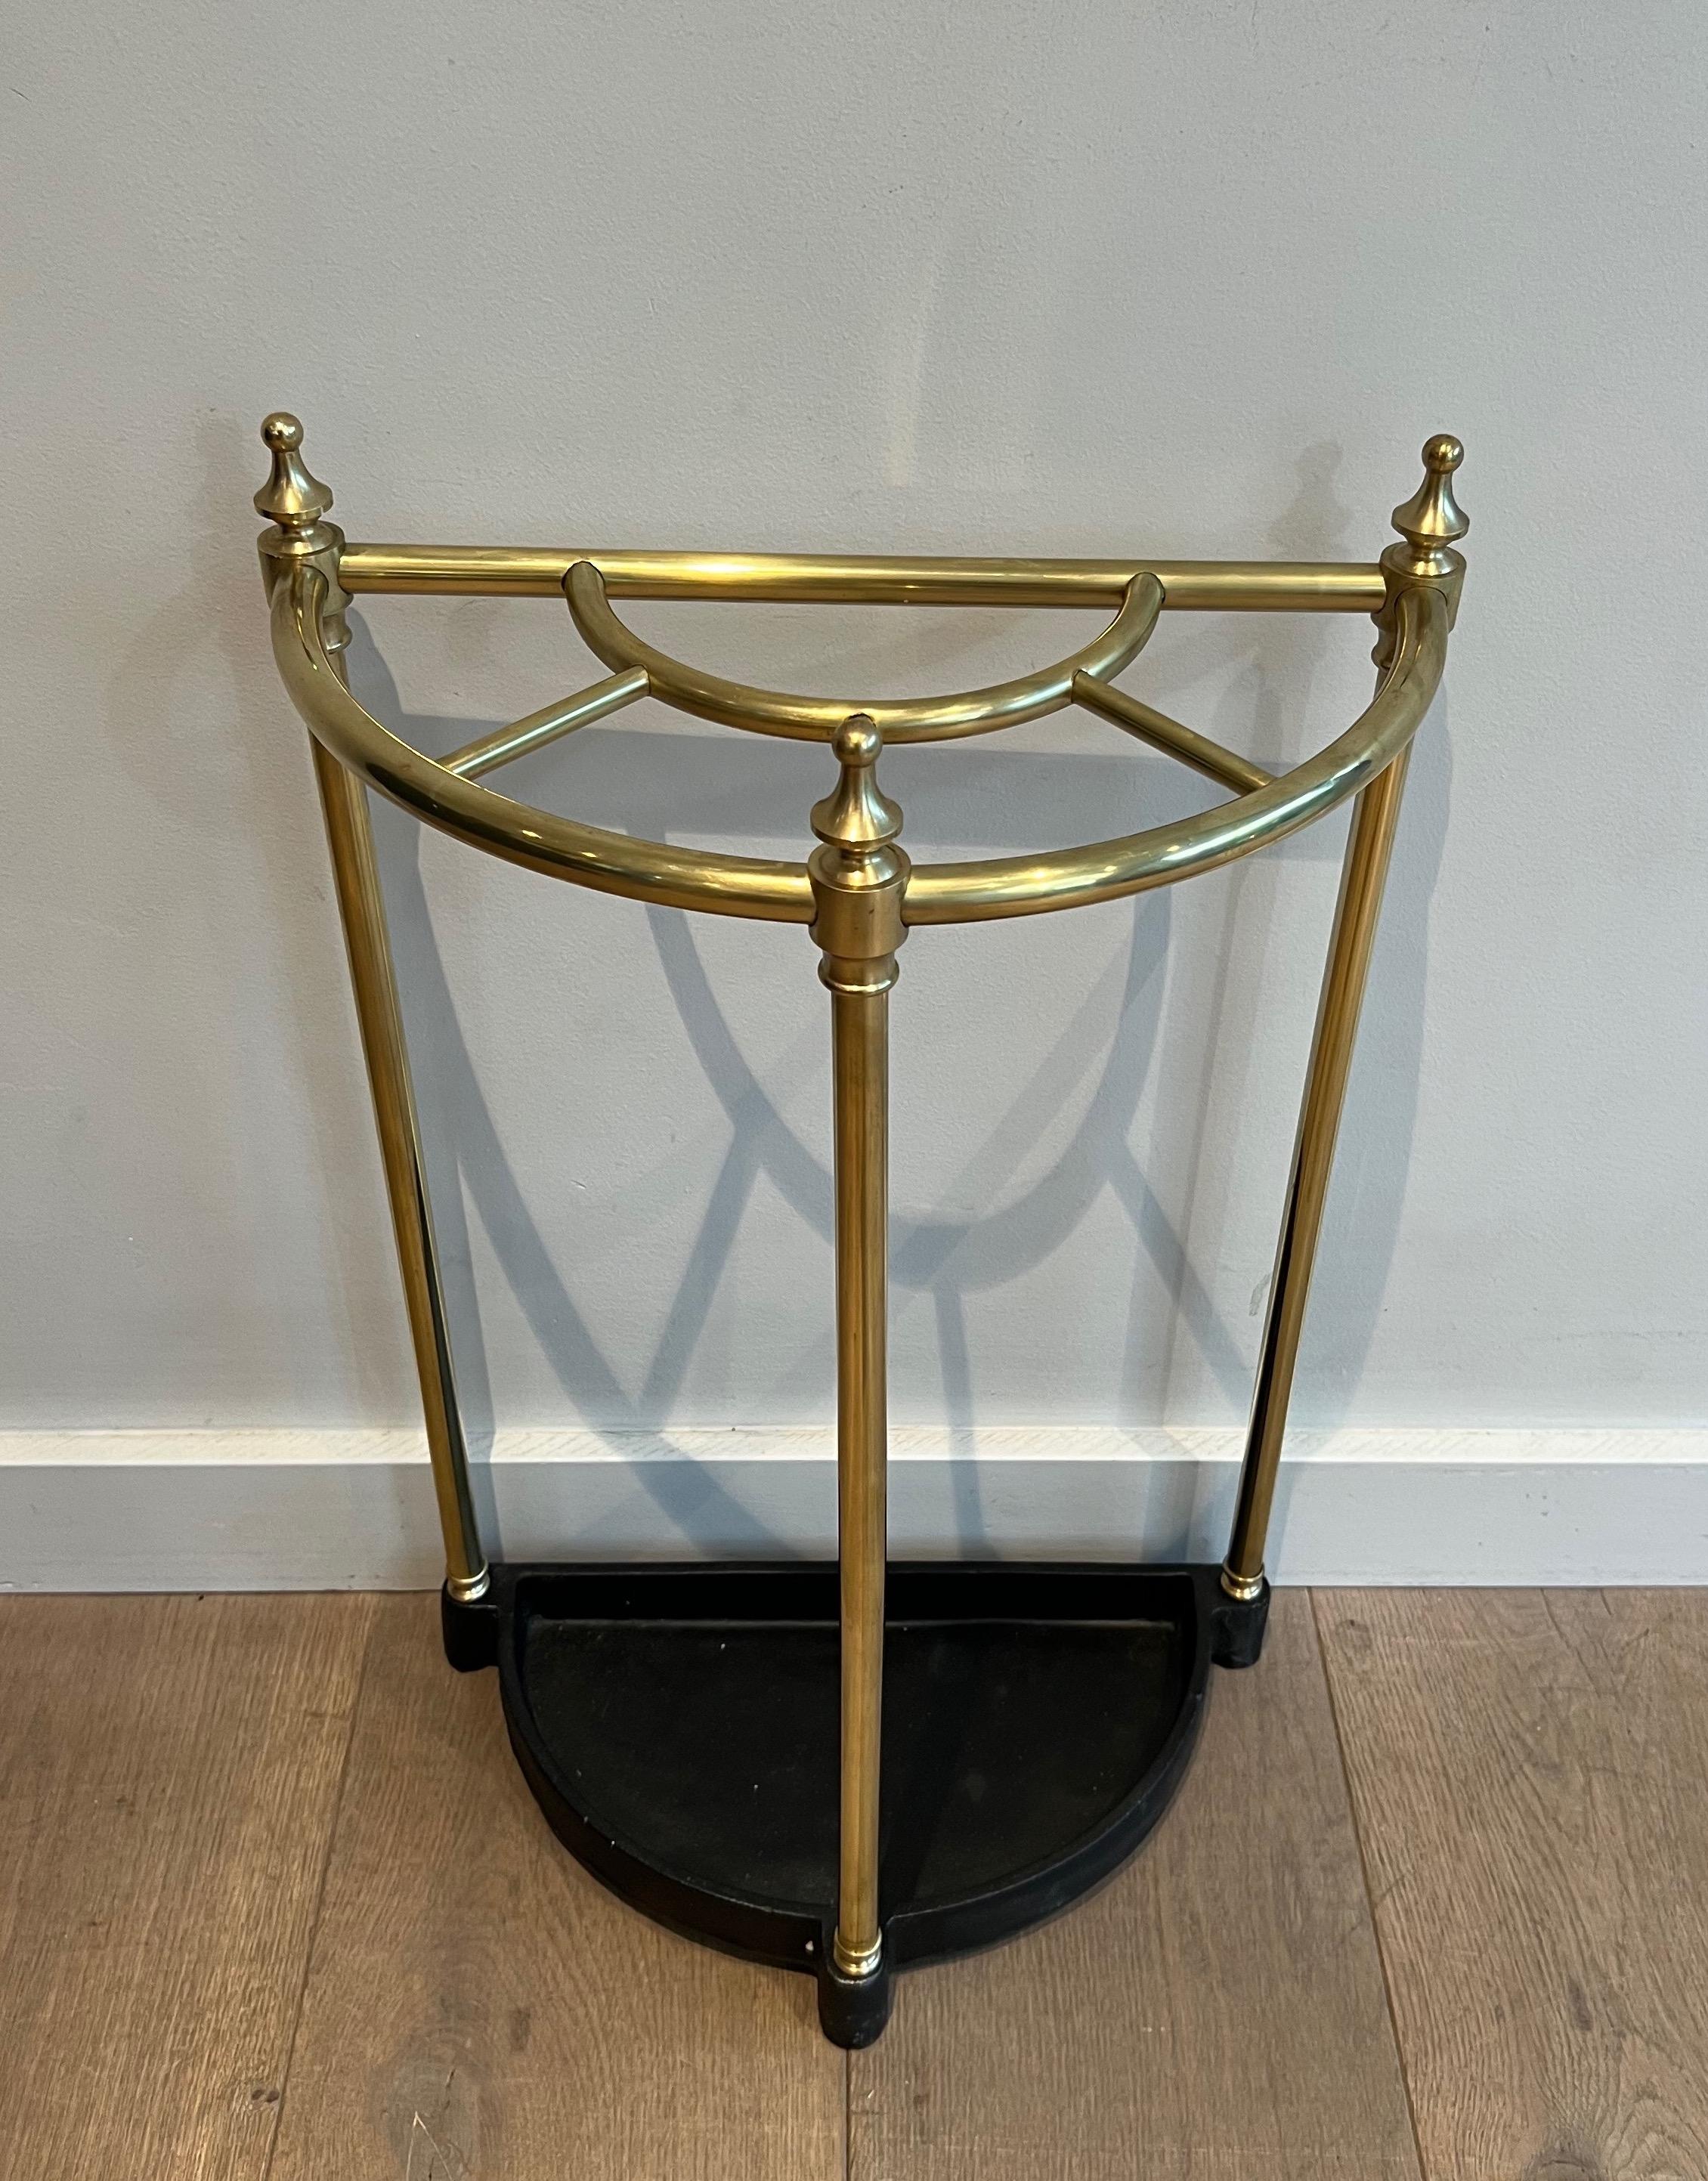 This rounded umbrella stand is made of brass and cast iron. This is a French work. Circa 1900